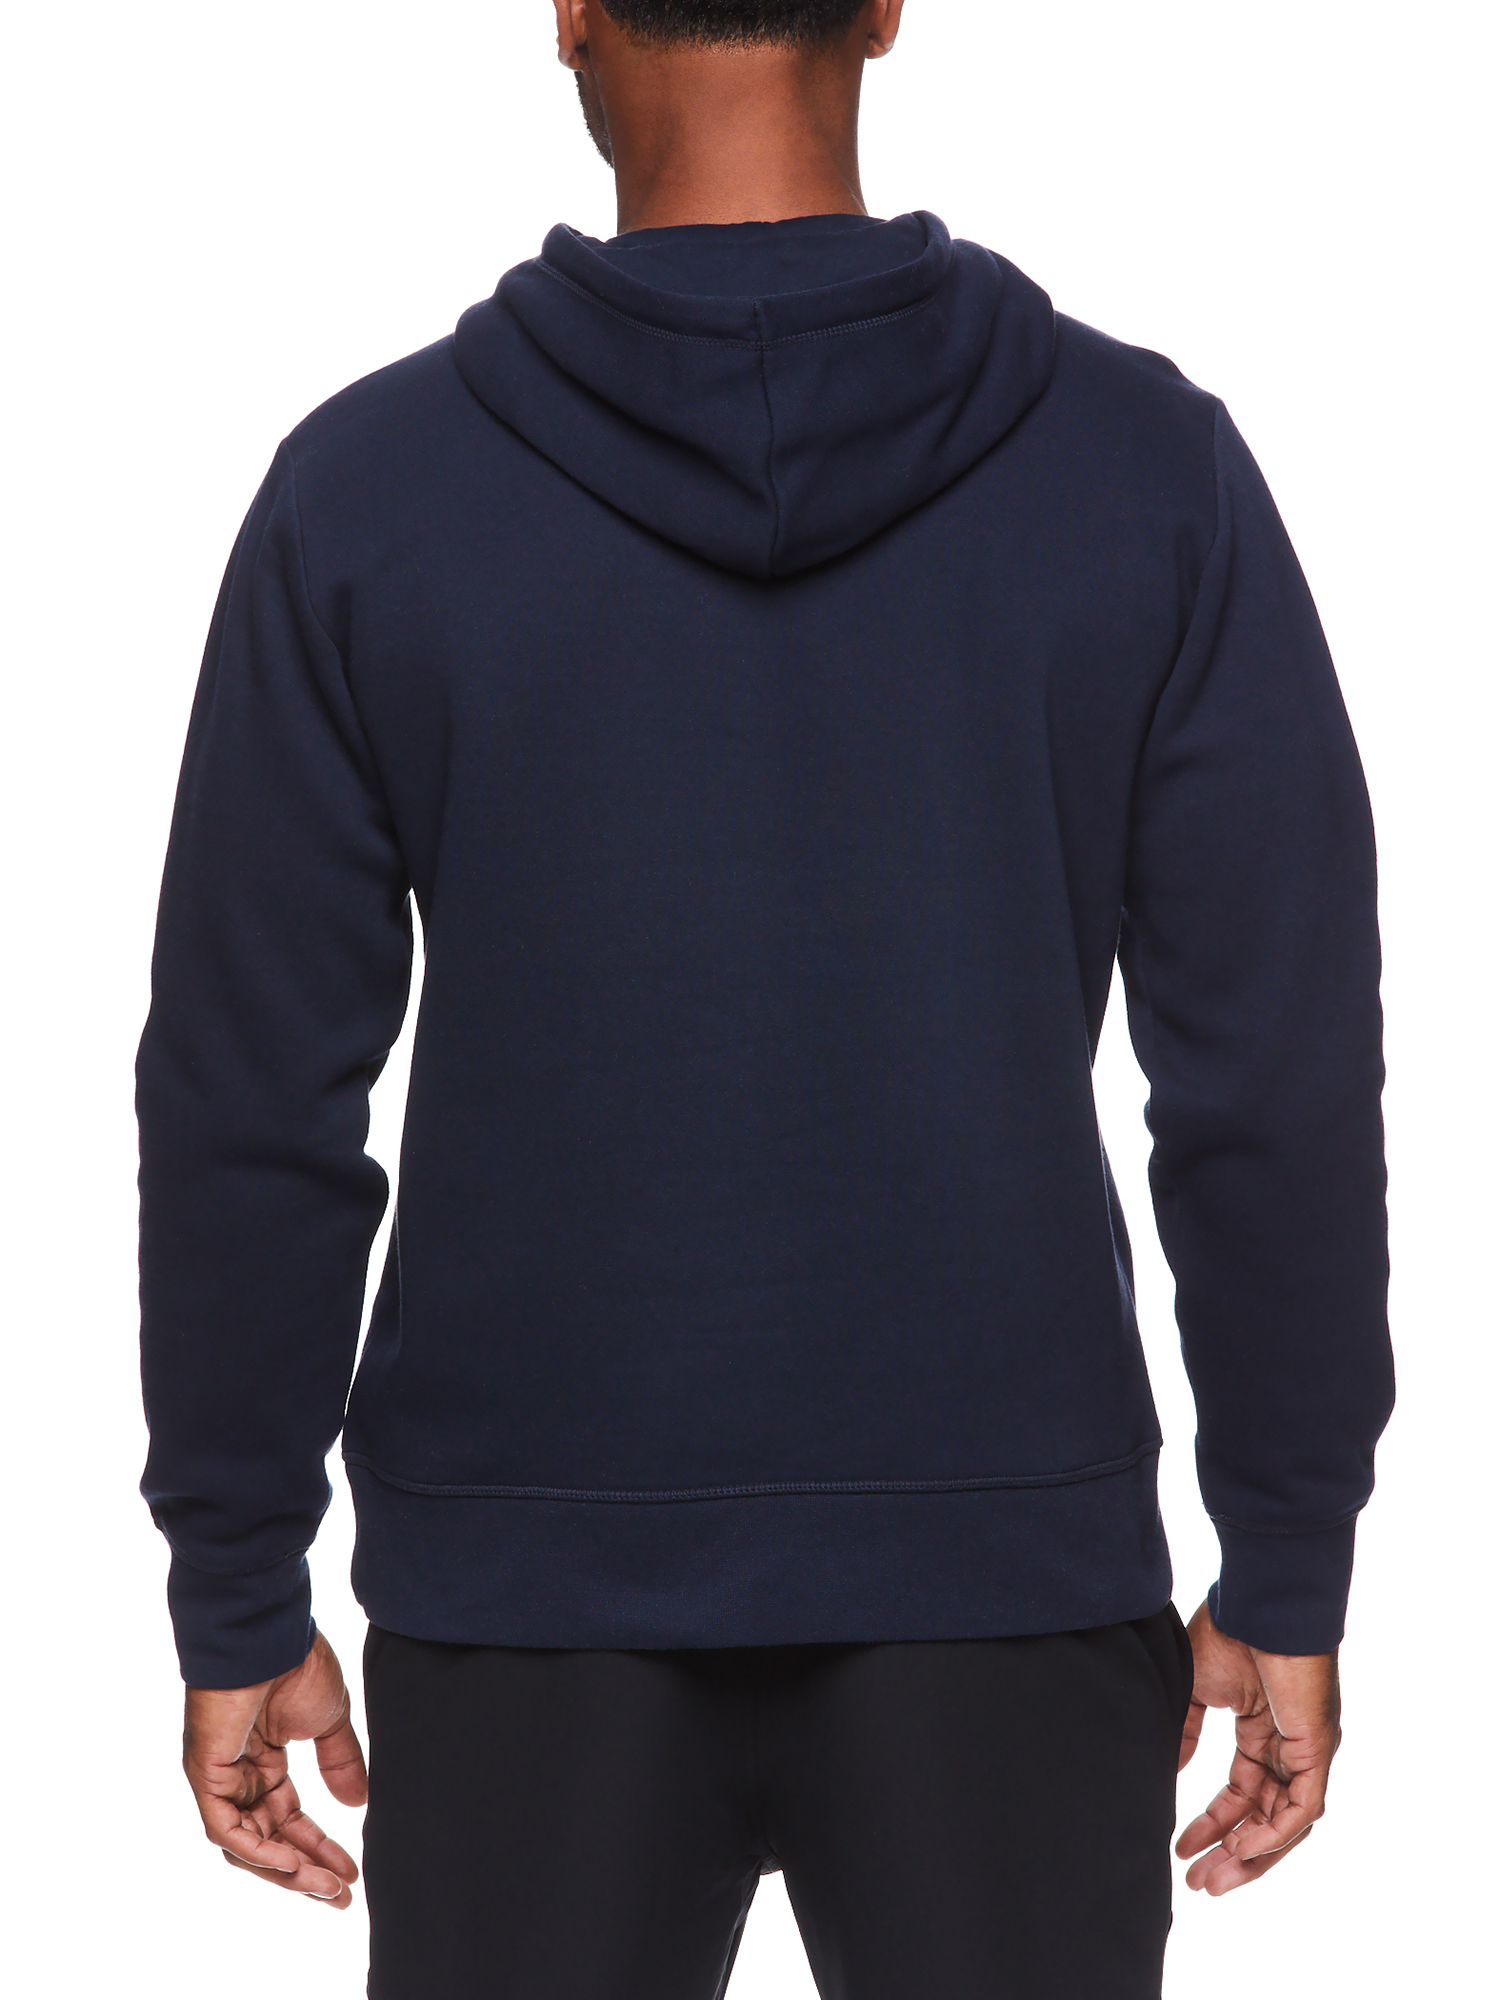 Reebok Mens and Big Mens Active Pullover Fleece Hoodie, Up to 3XL - image 4 of 5